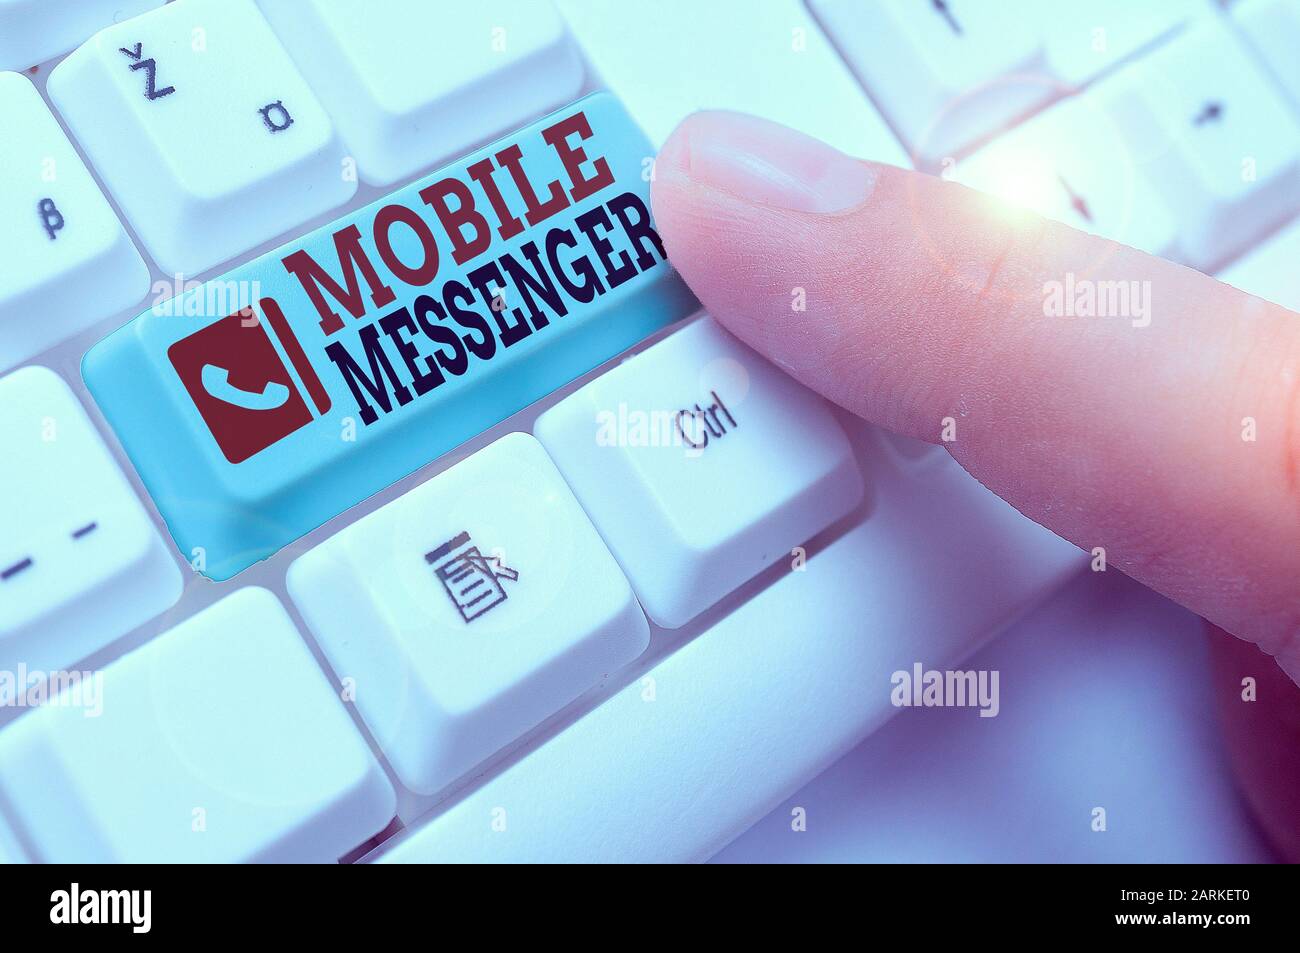 Text sign showing Mobile Messenger. Business photo showcasing mobile tool that allows users to send chat messages Stock Photo